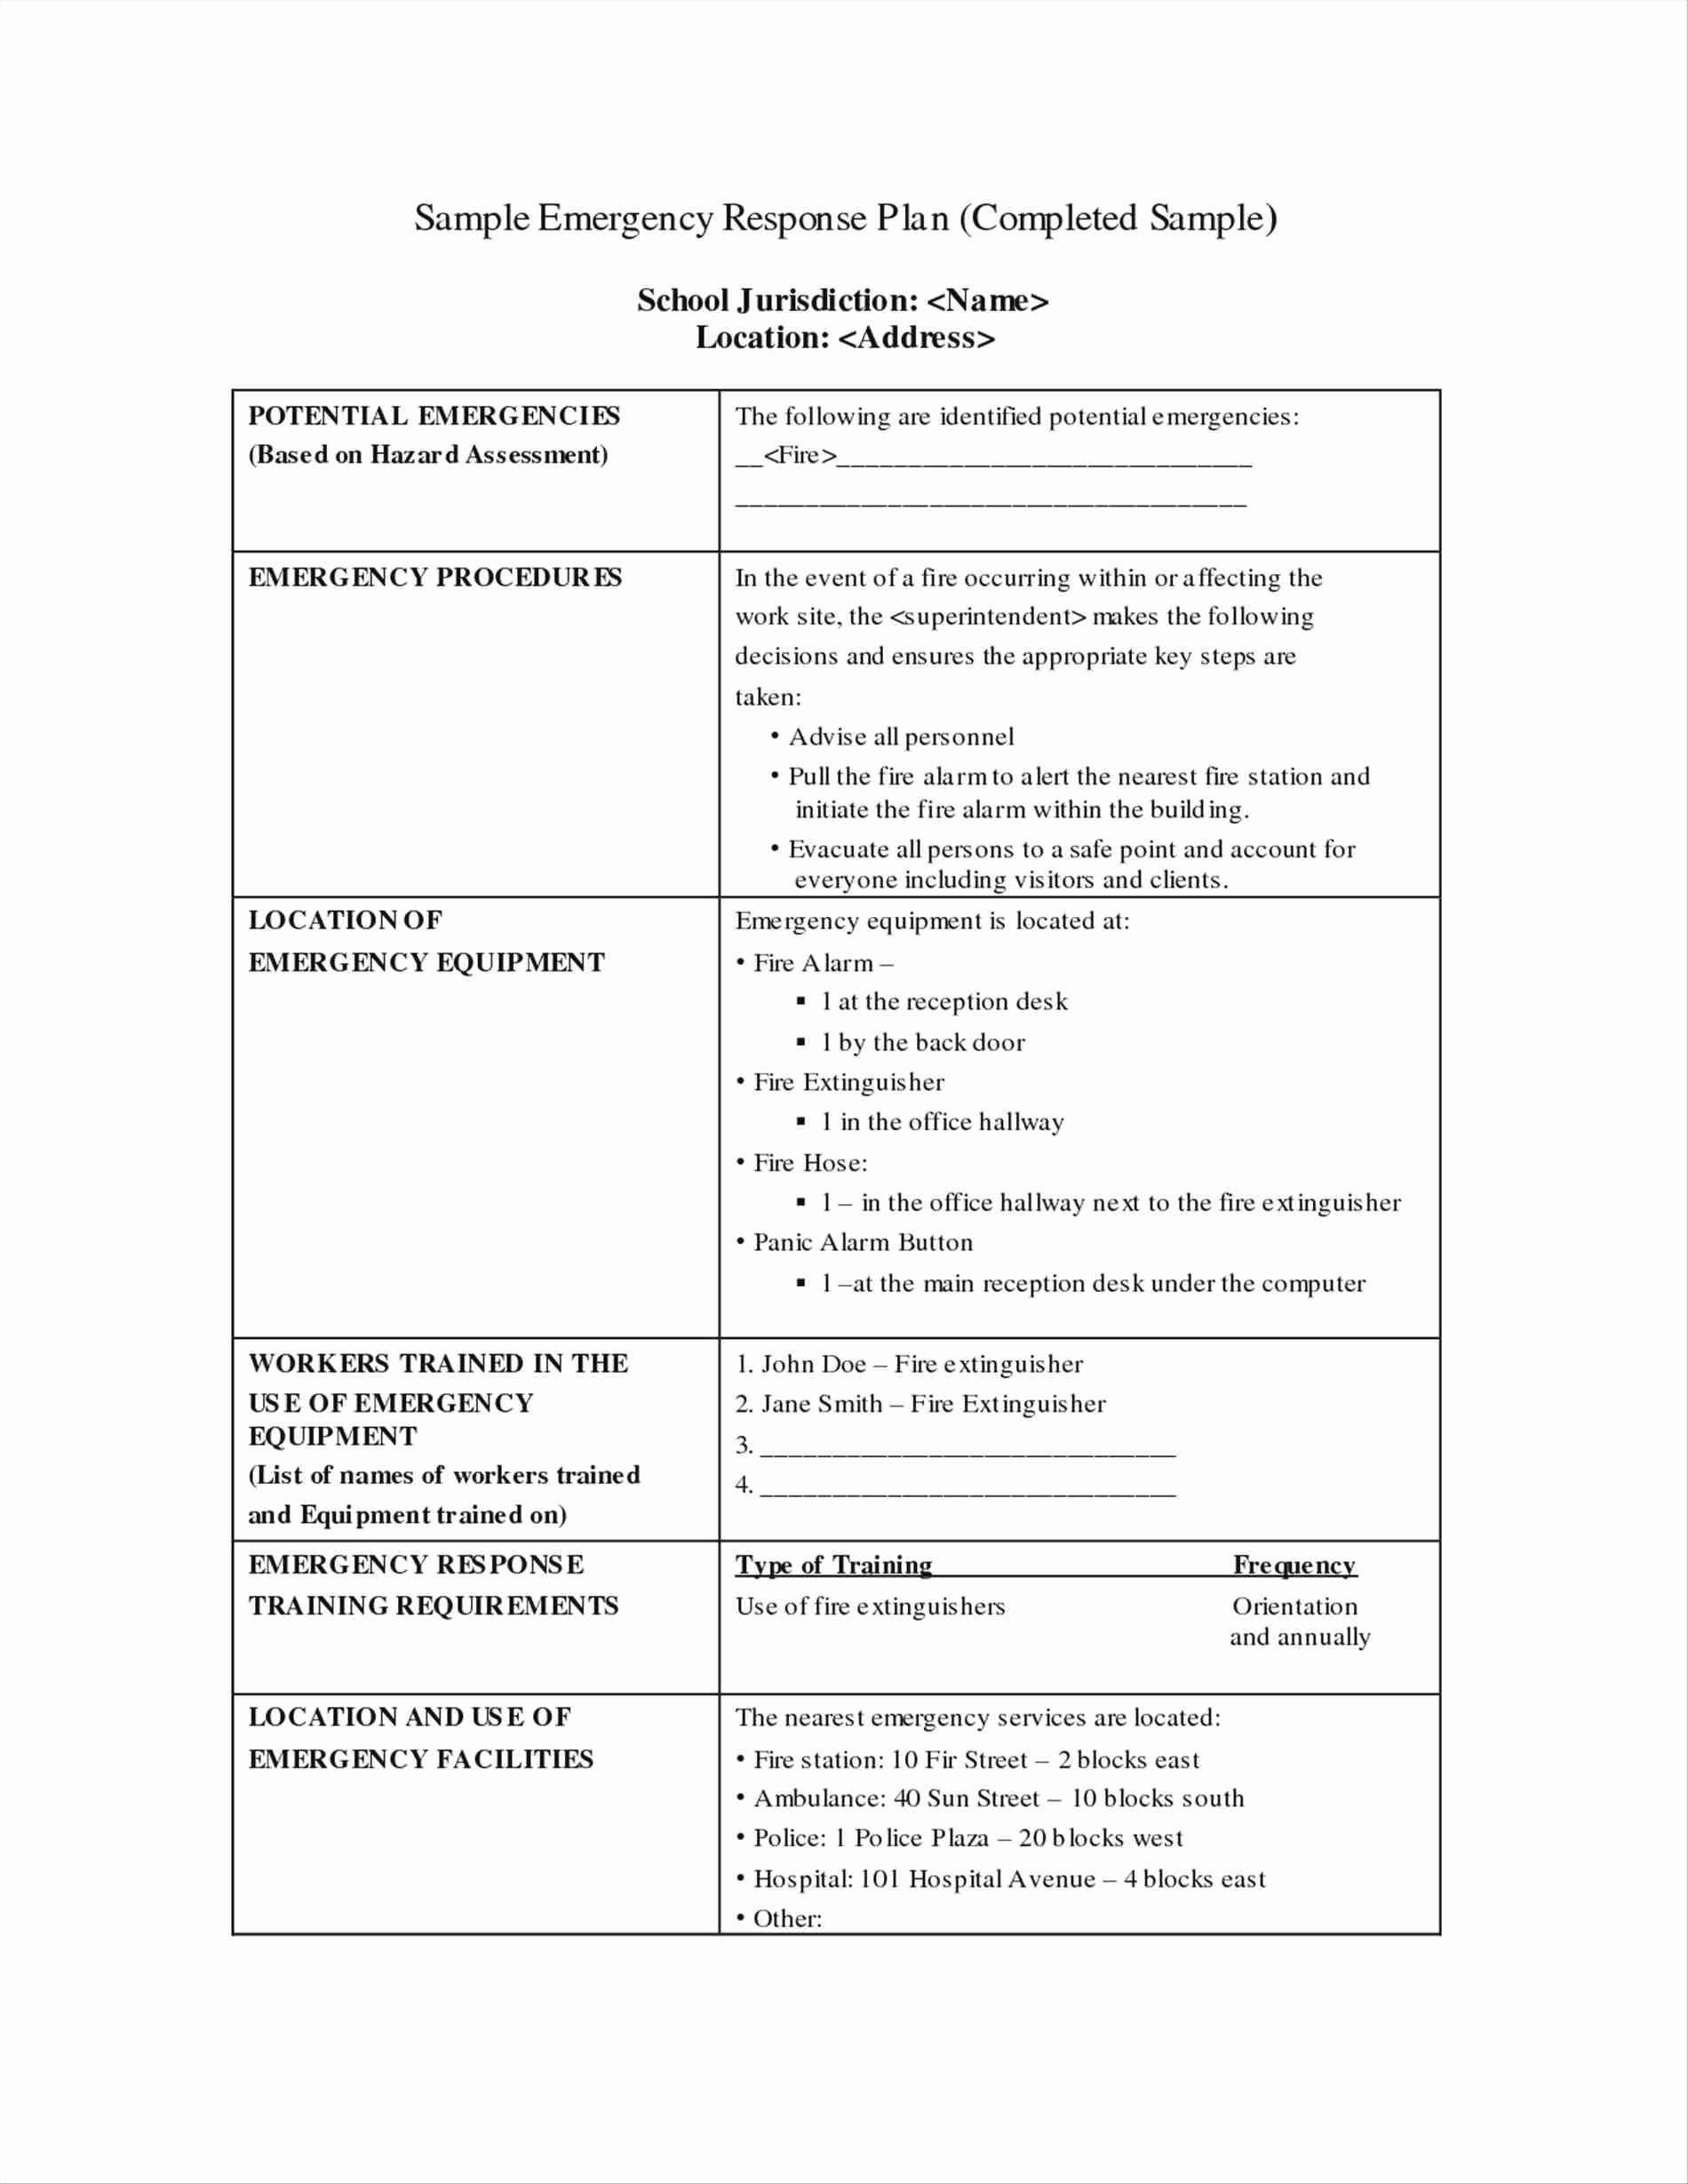 Emergency Operations Plan Template Unique Lovely School Emergency Operations Plan Template